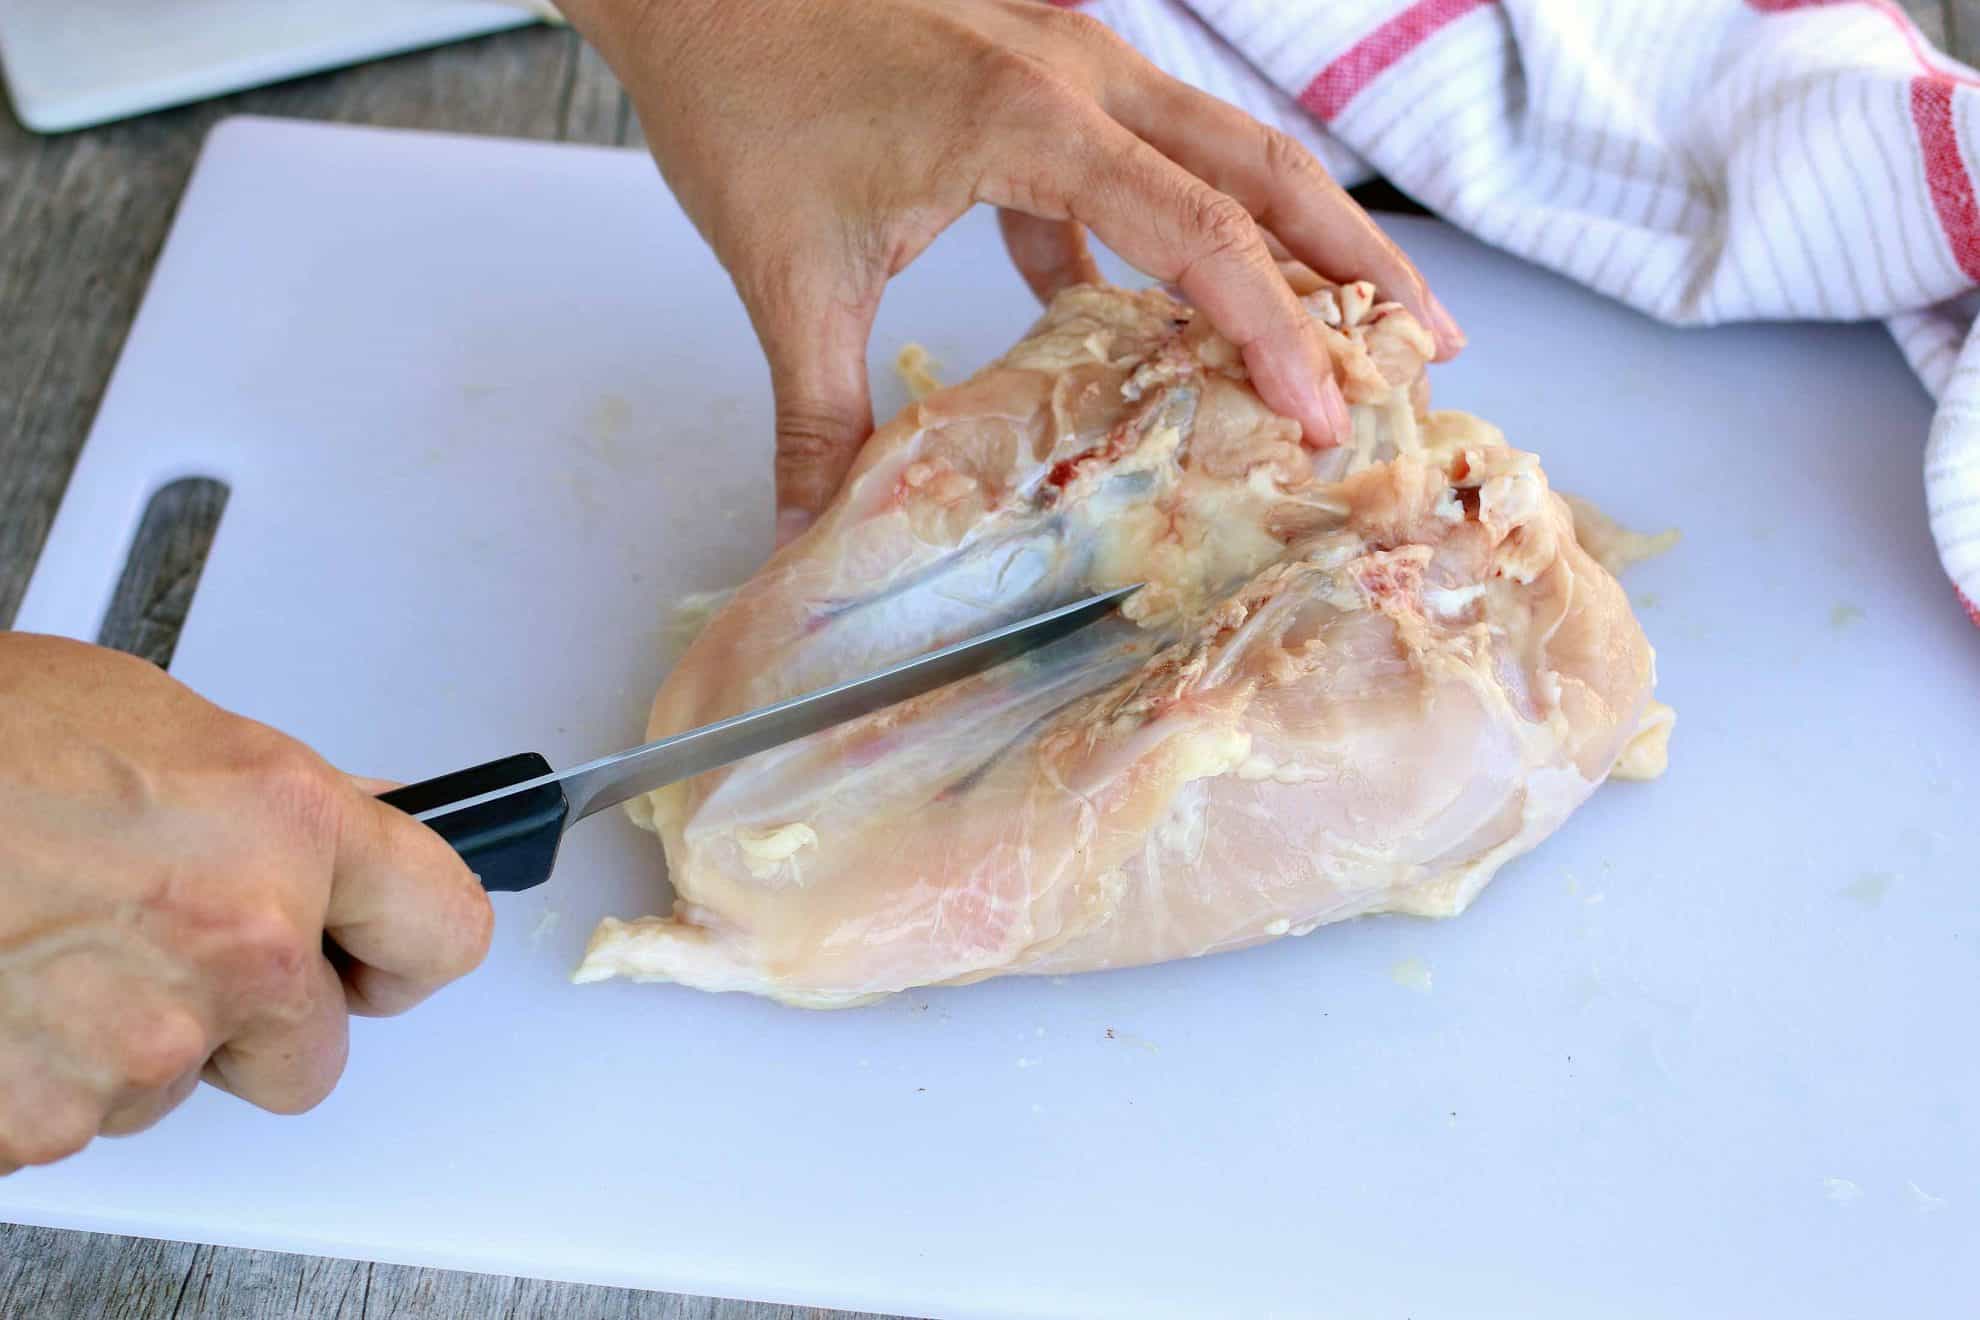 Removing the keel bone to split the breast of a chicken.